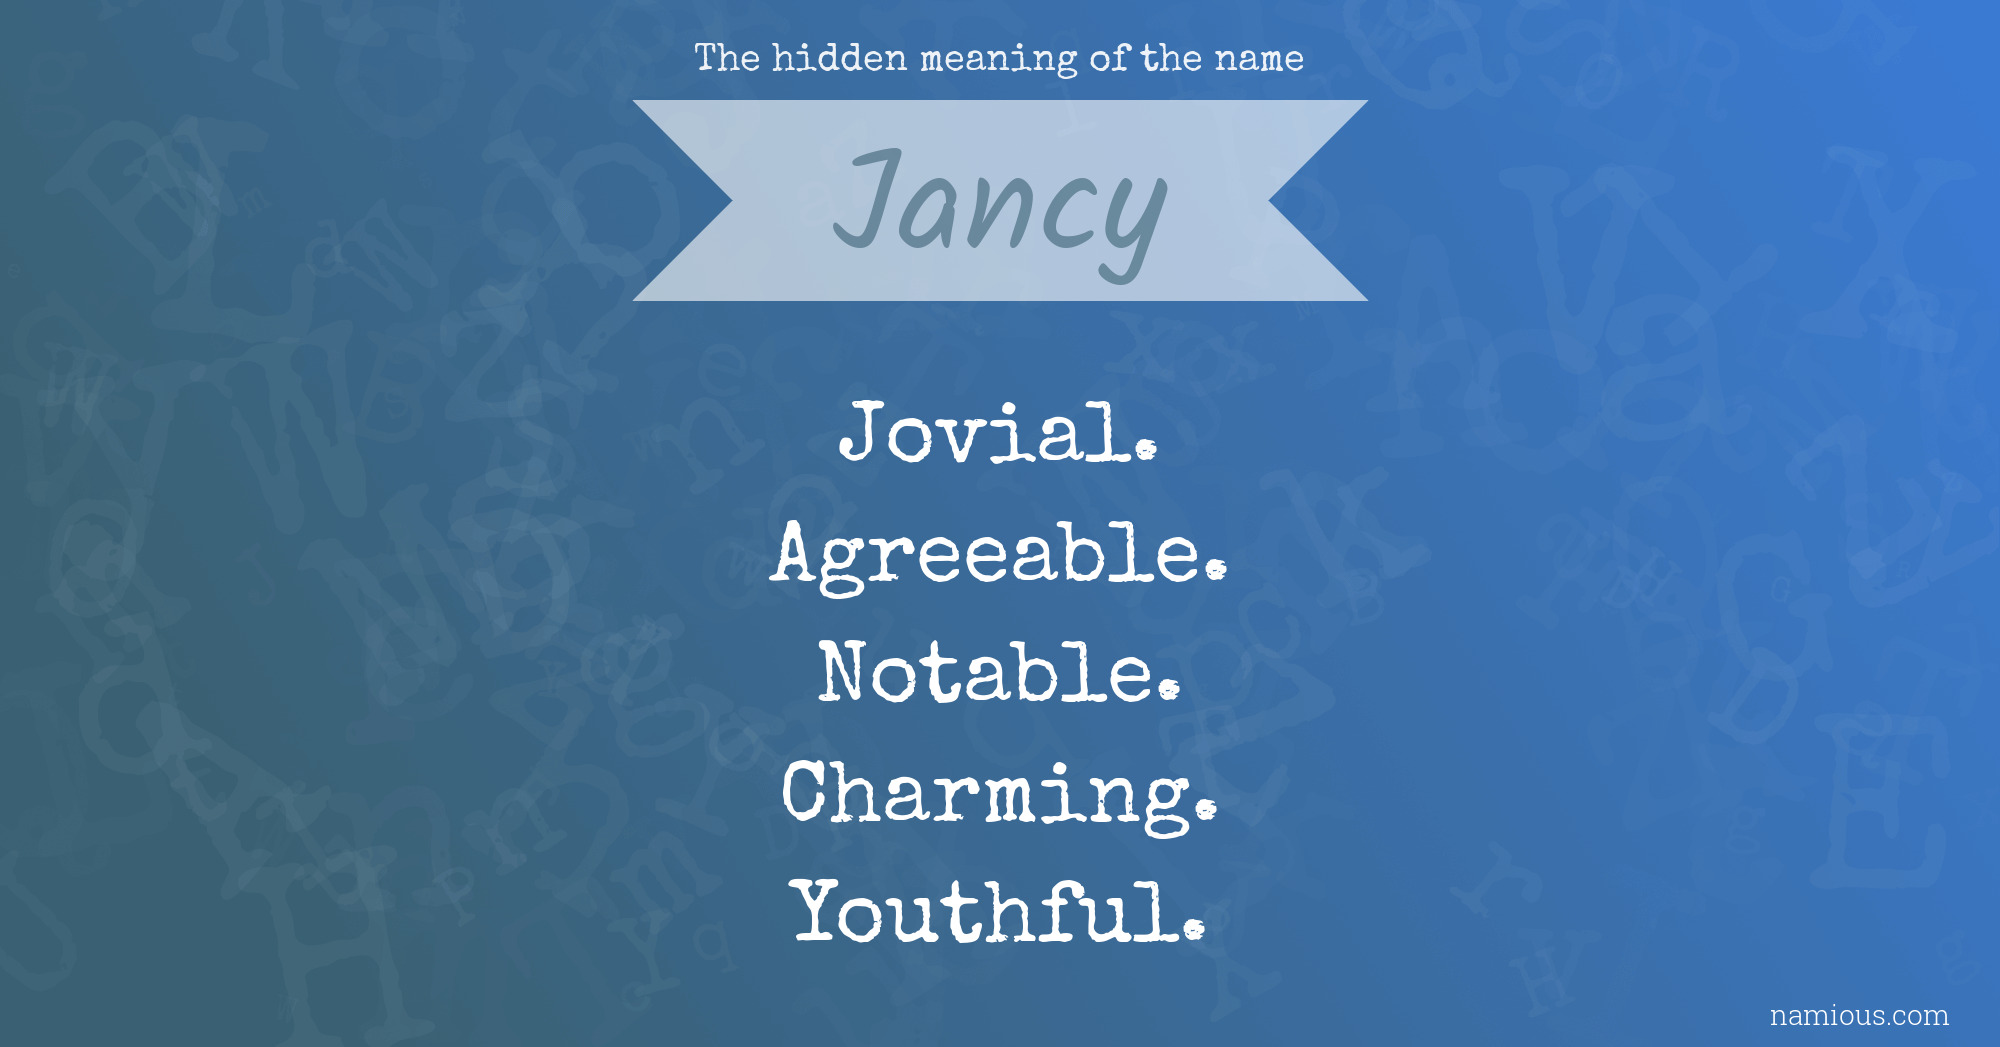 The hidden meaning of the name Jancy